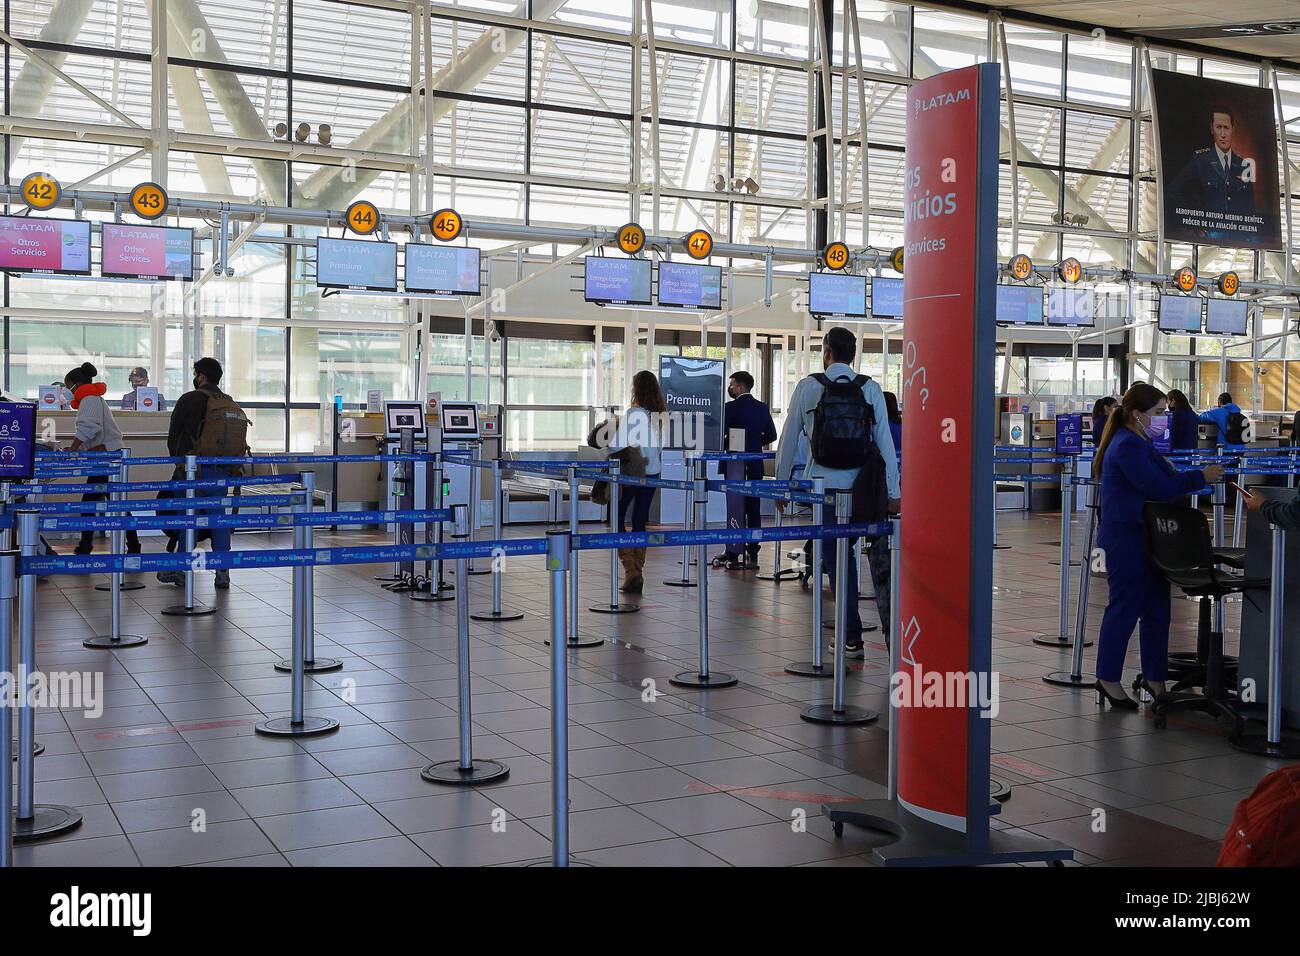 Santiago, Chile-May 20, 2022: Latam (Chilean airline) counter Stock Photo